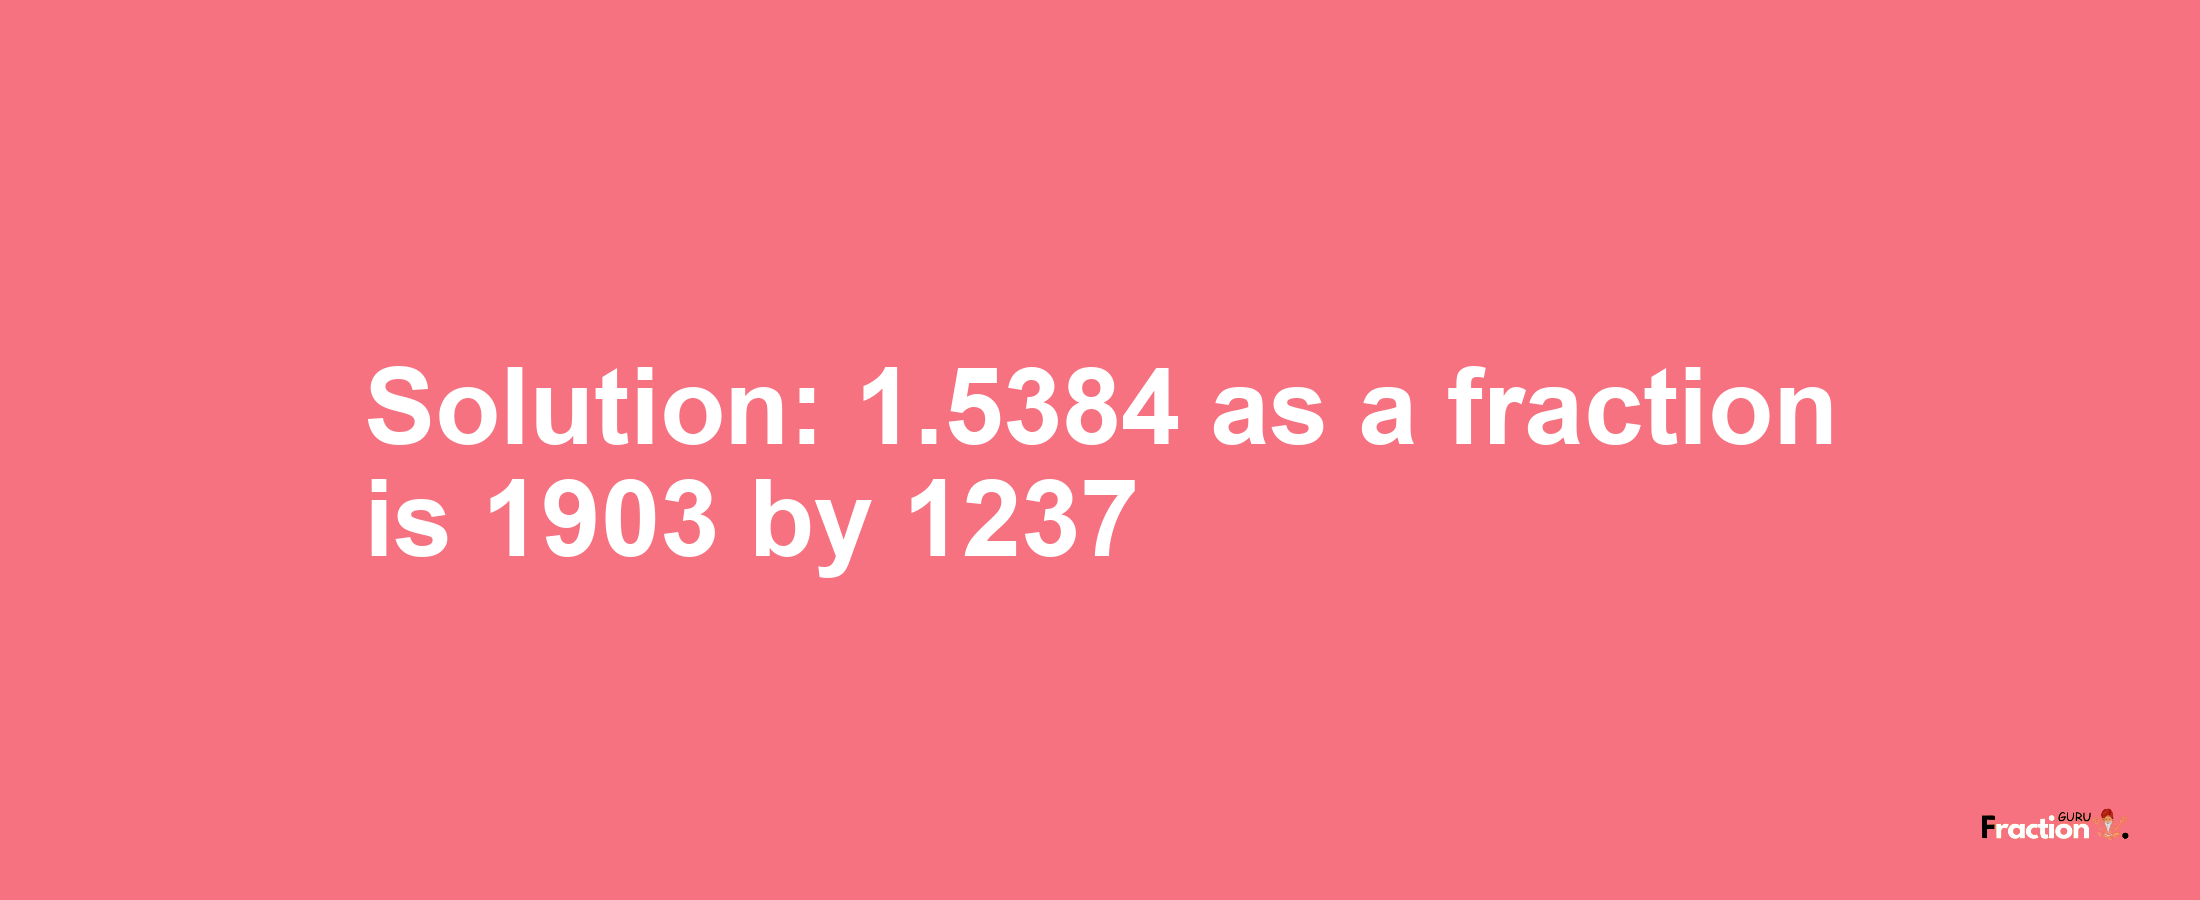 Solution:1.5384 as a fraction is 1903/1237